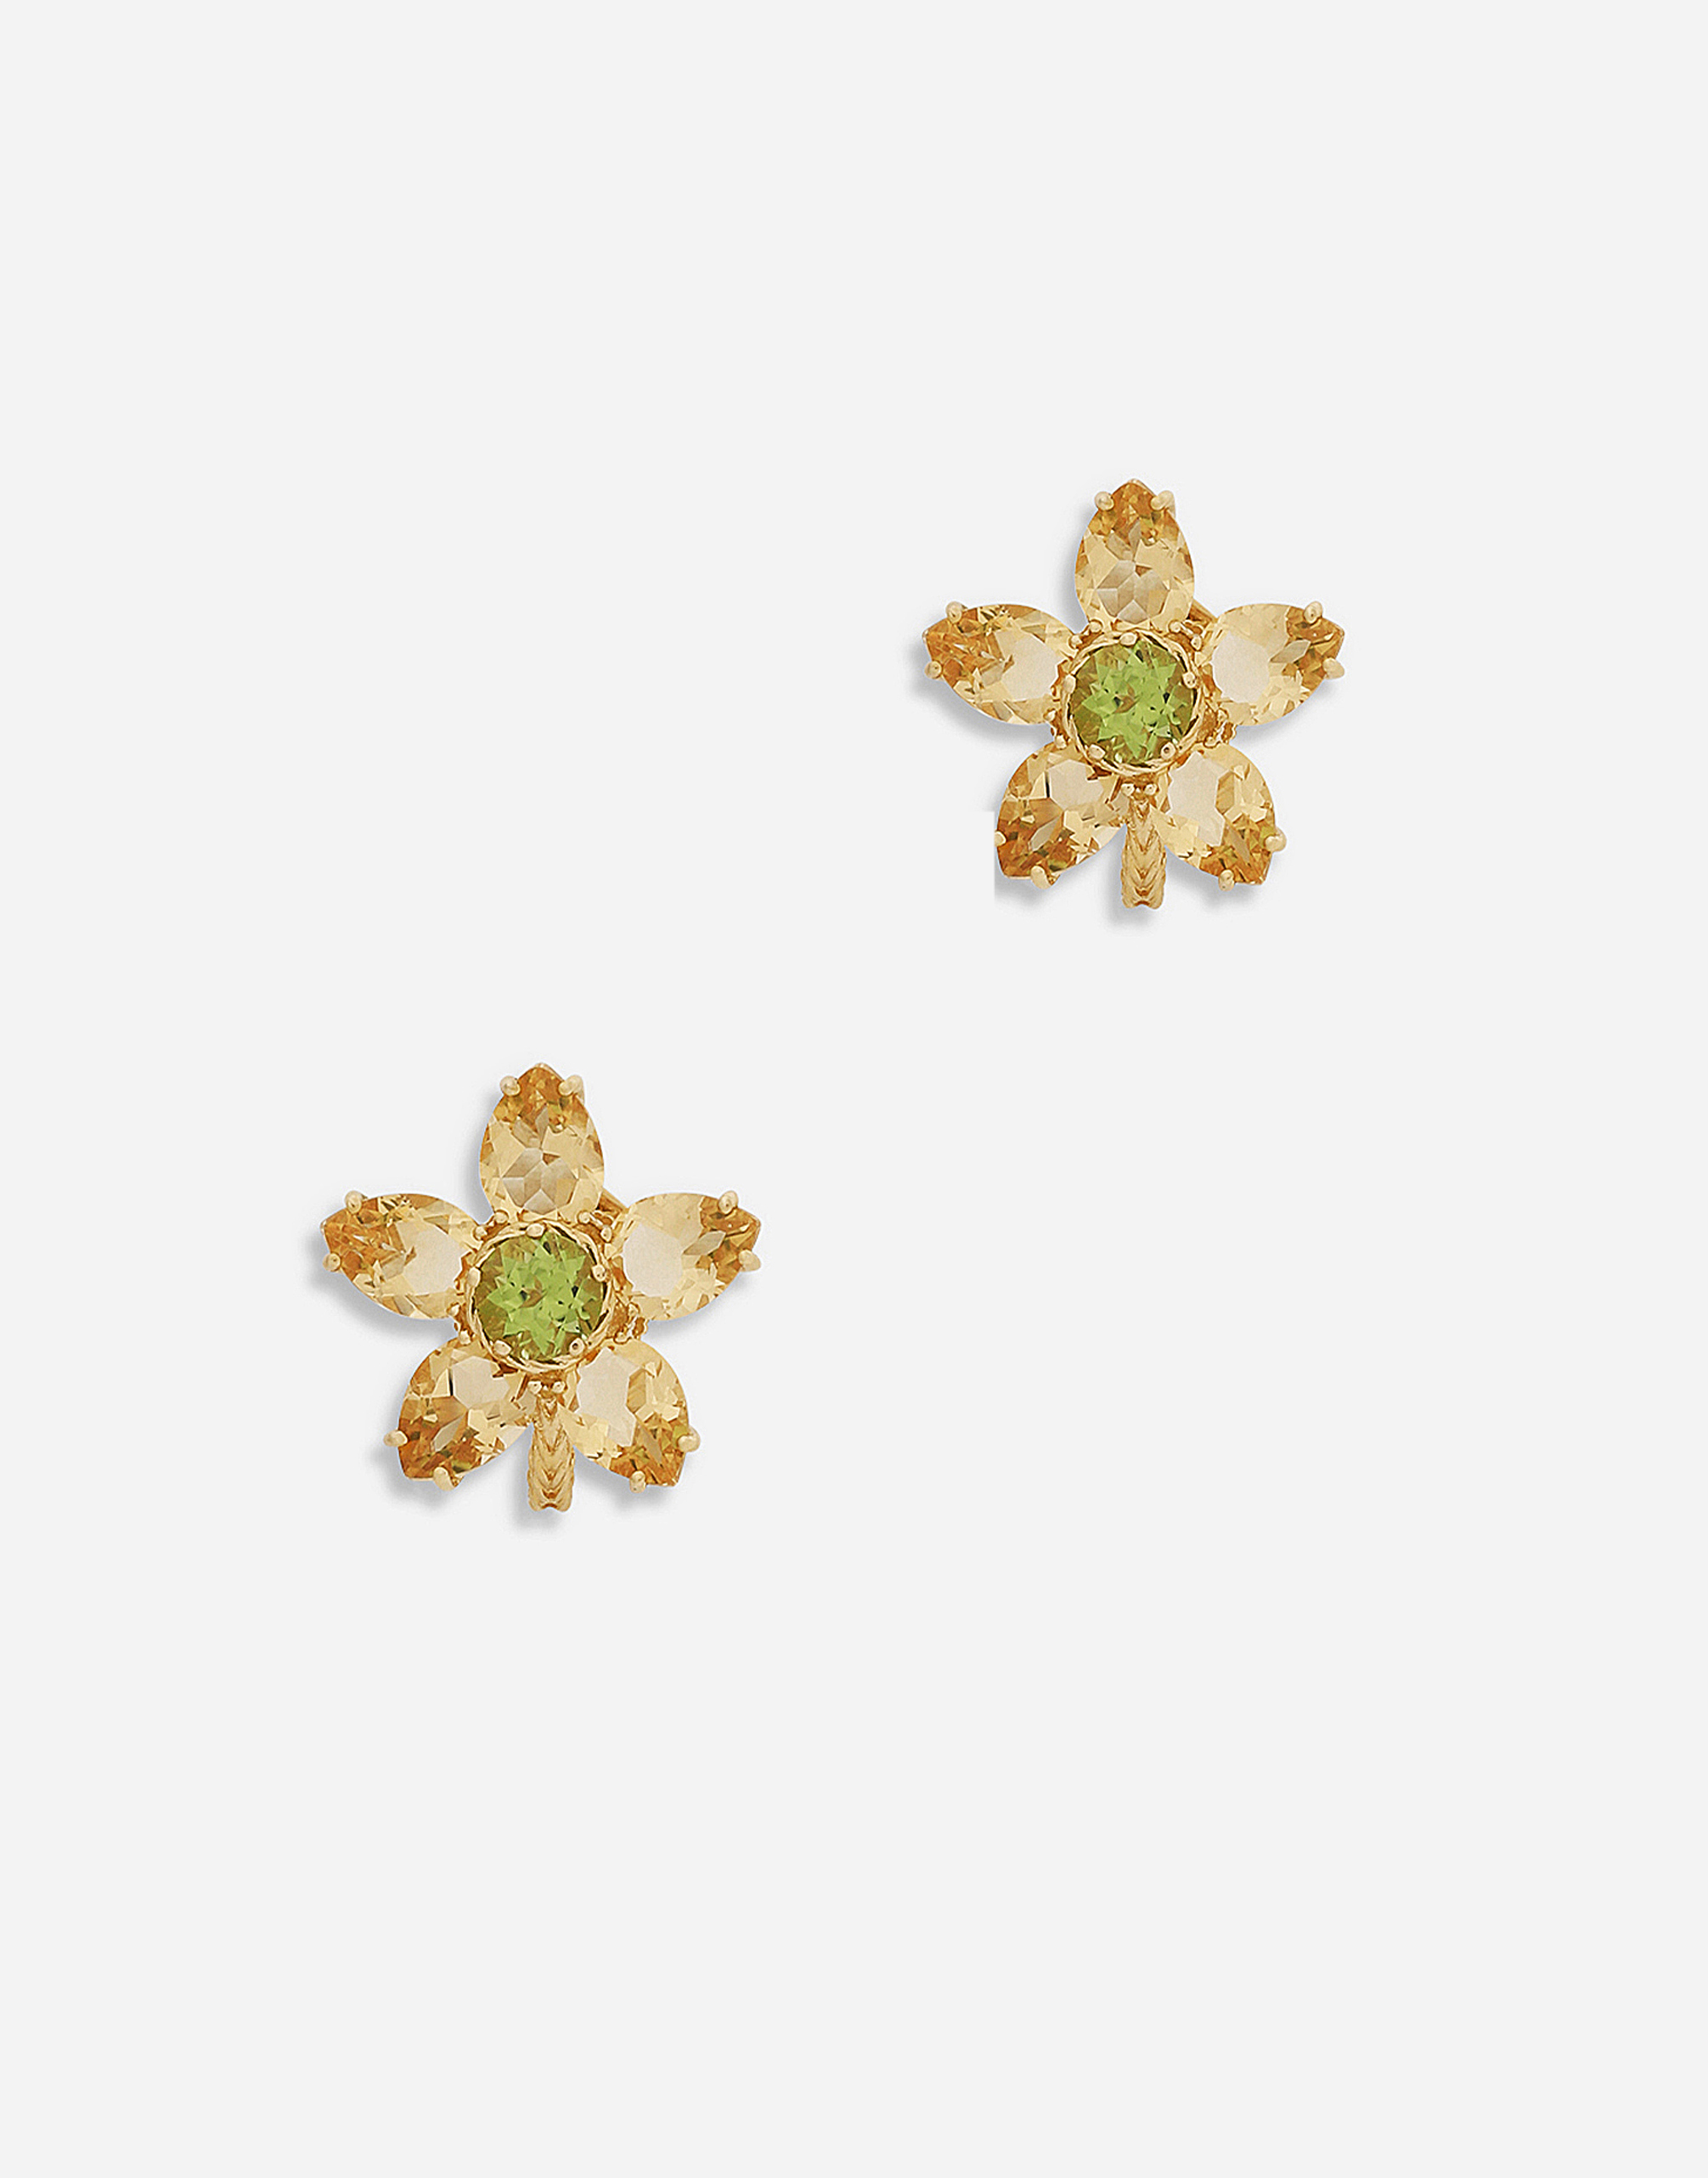 Spring earrings in yellow 18kt gold with citrine flower motif in Gold